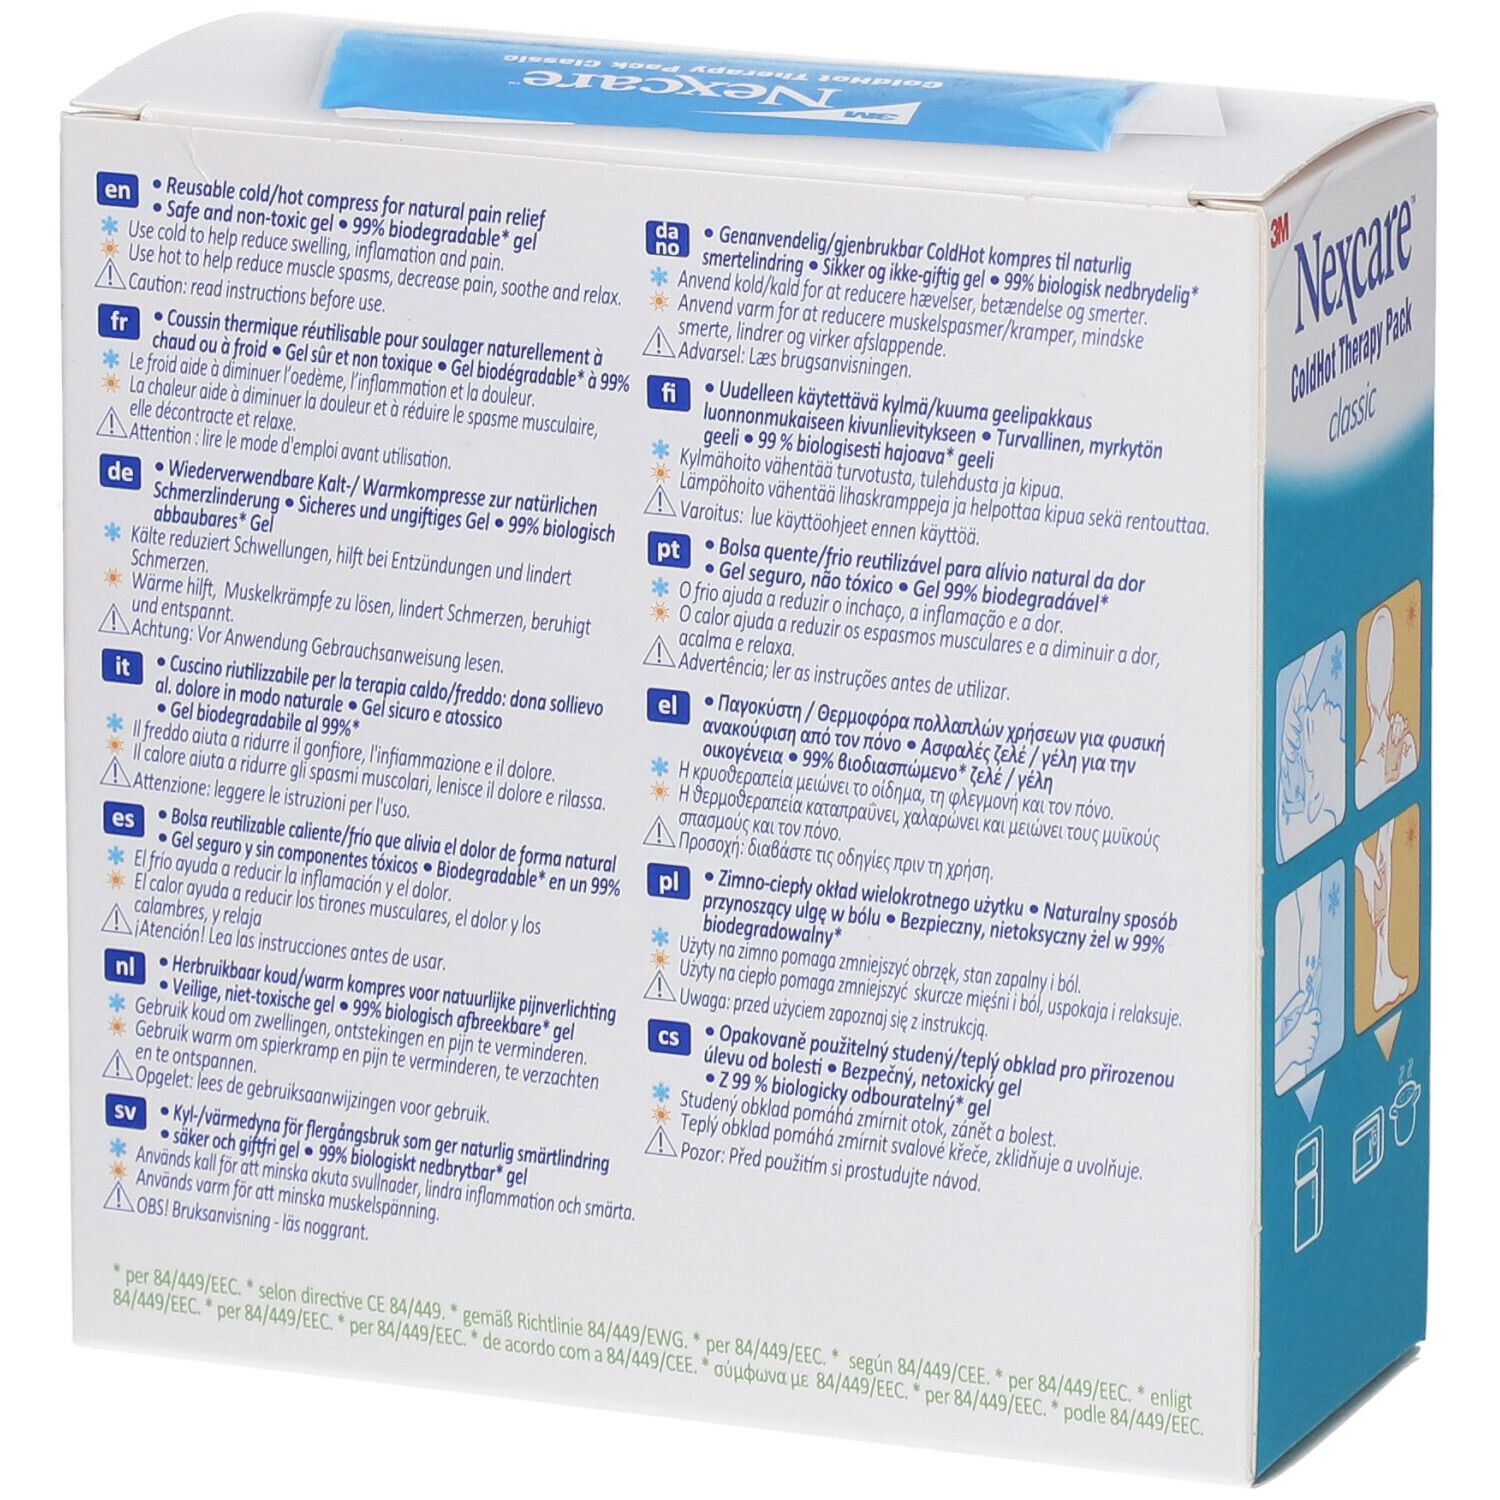 3M­™ Nexcare® Coldhot Therapy Pack Classic 26 x 11 cm